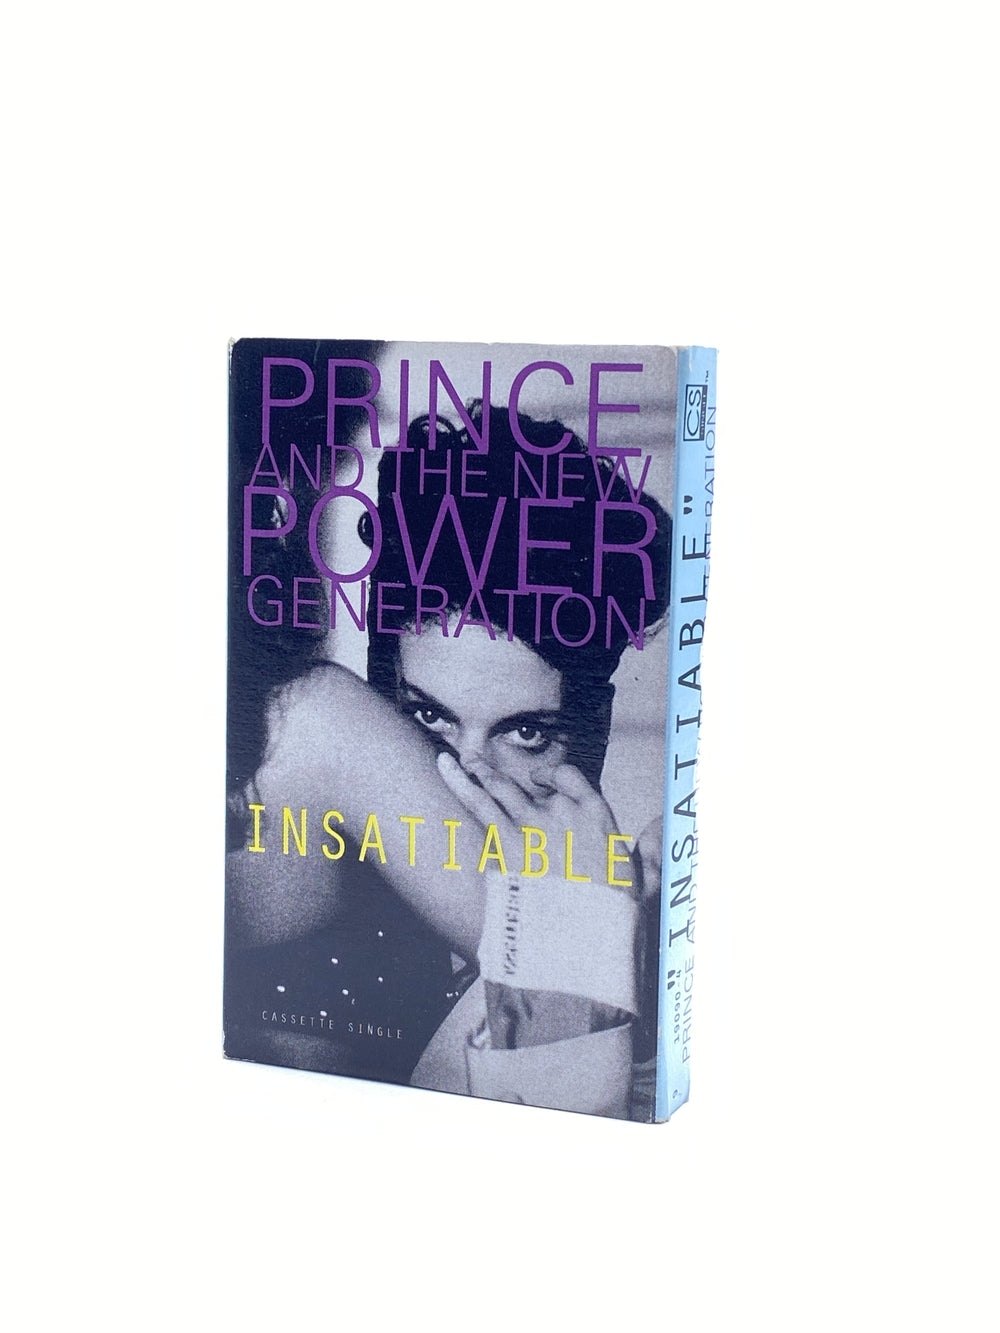 Prince – & The New Power Generation - Insatiable Cassette Single SR Country: US Preloved AS NEW : 1991